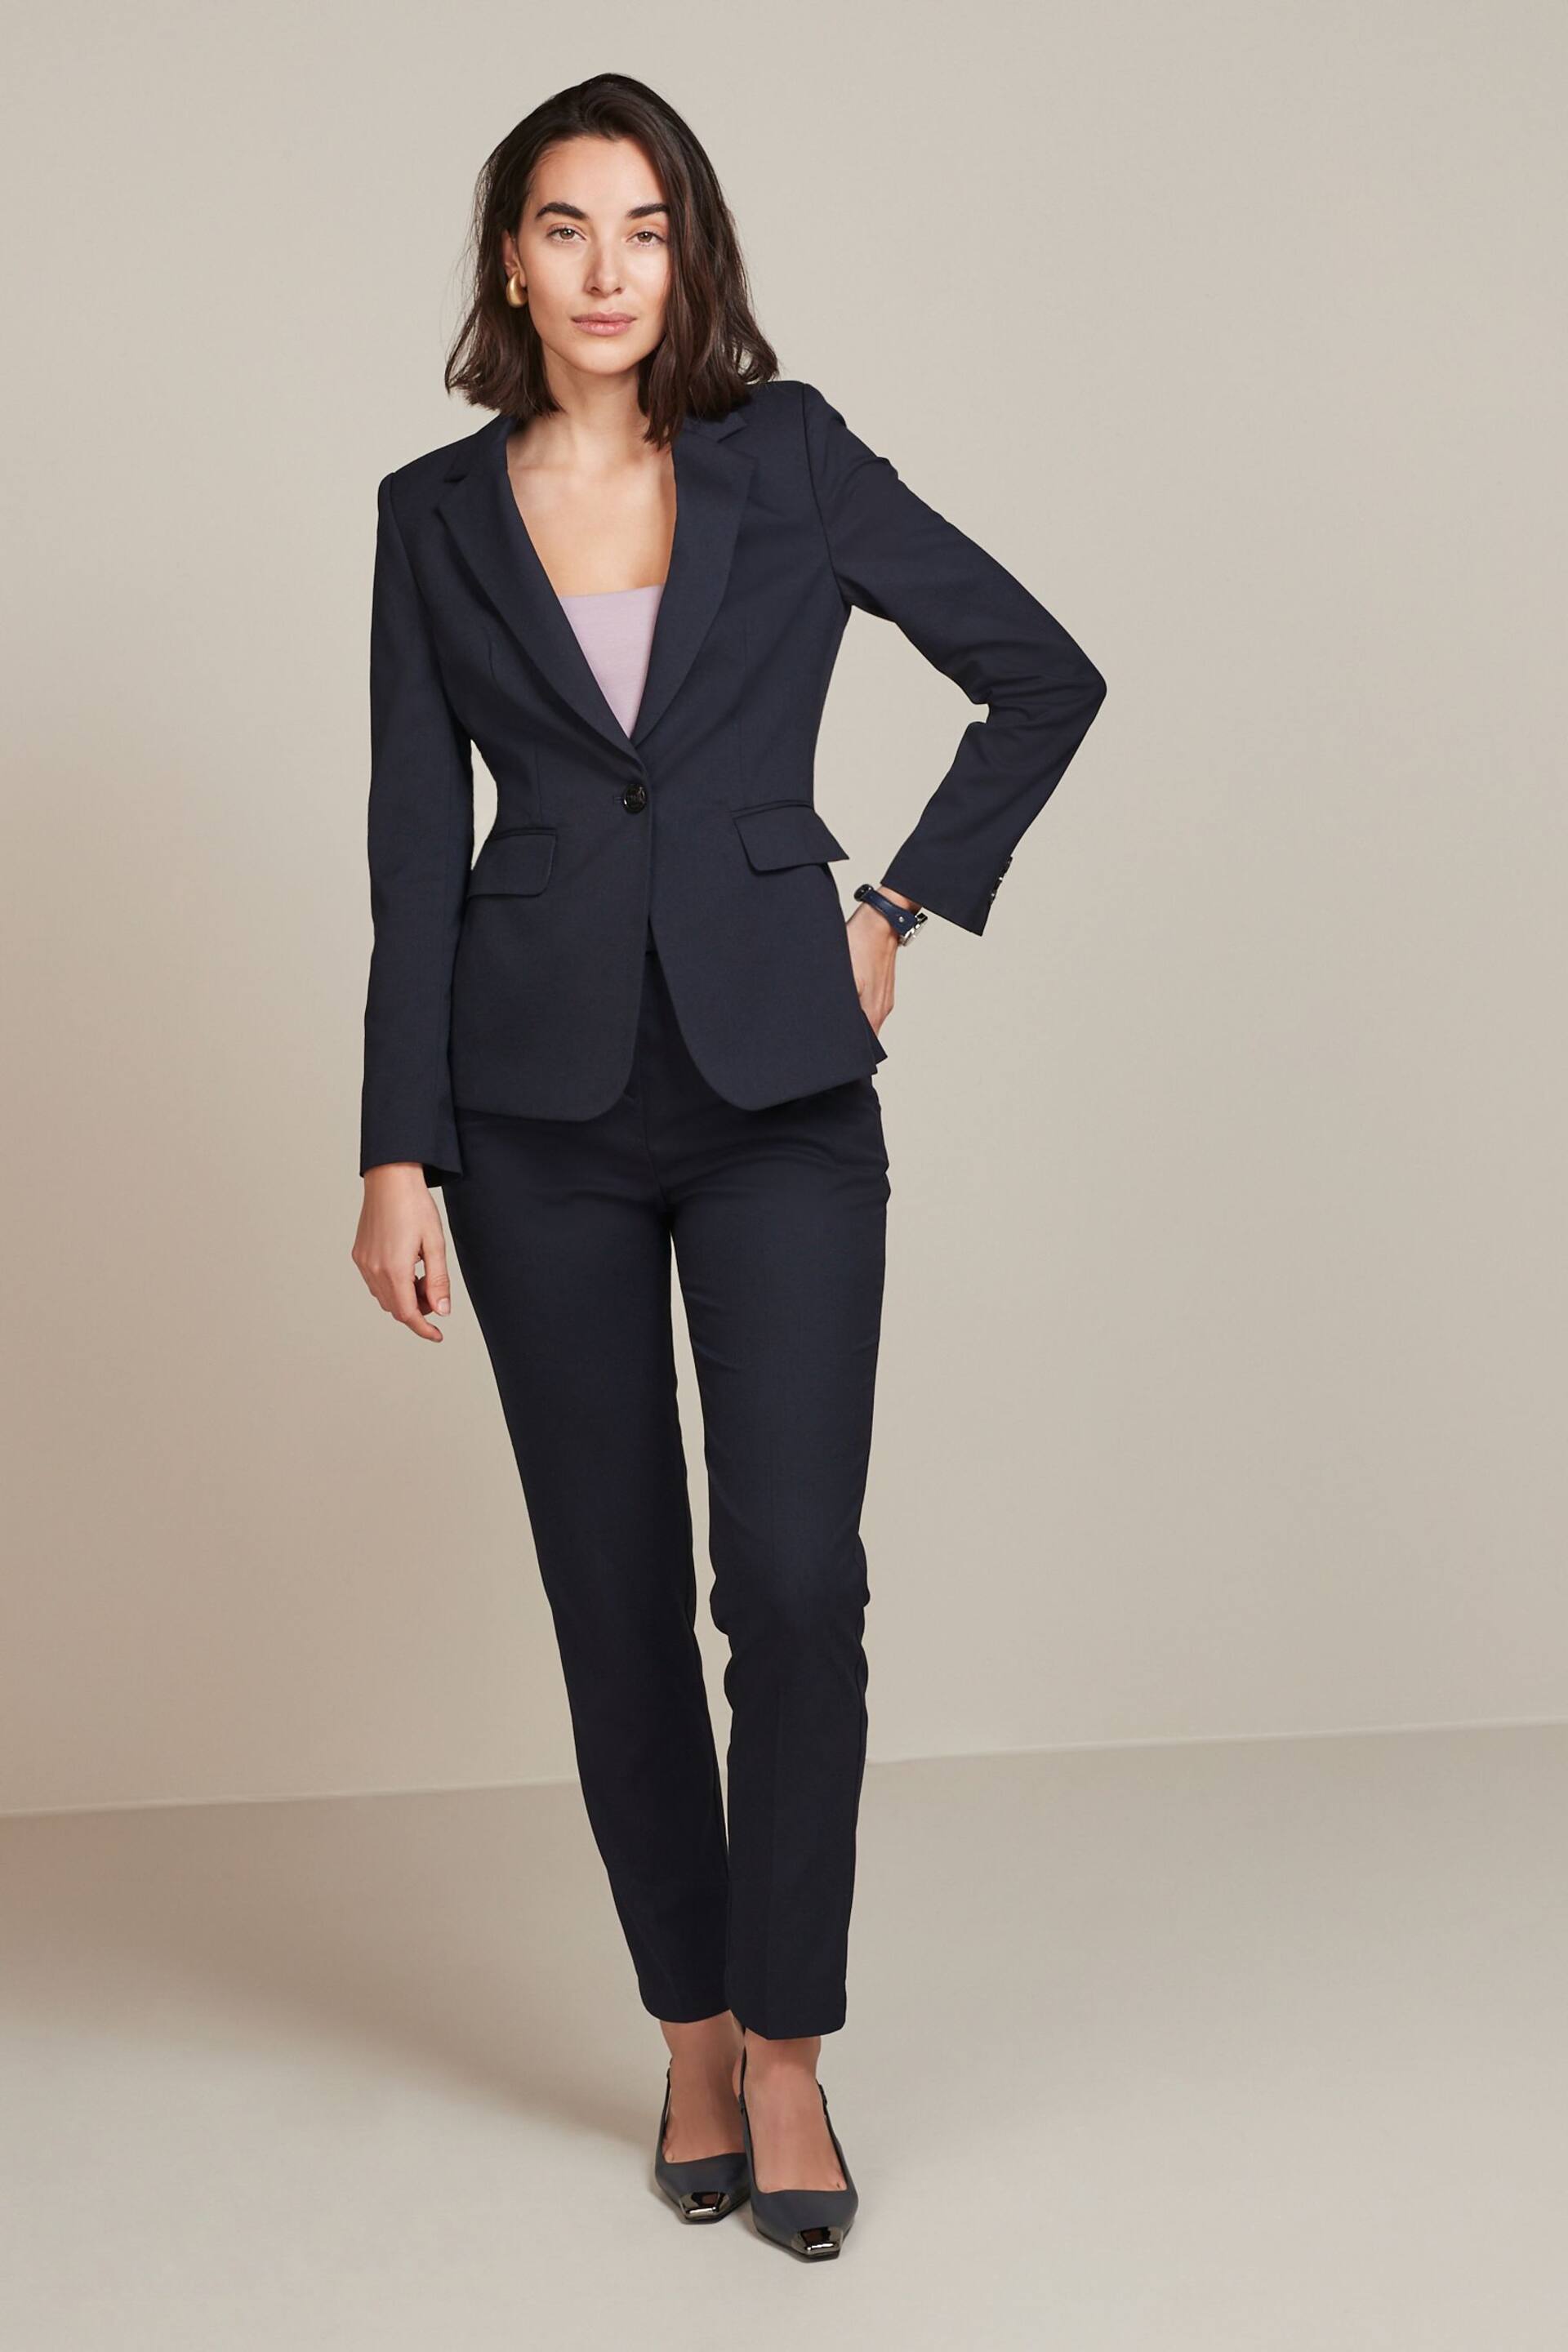 Navy Blue Tailored Single Breasted Jacket - Image 2 of 6